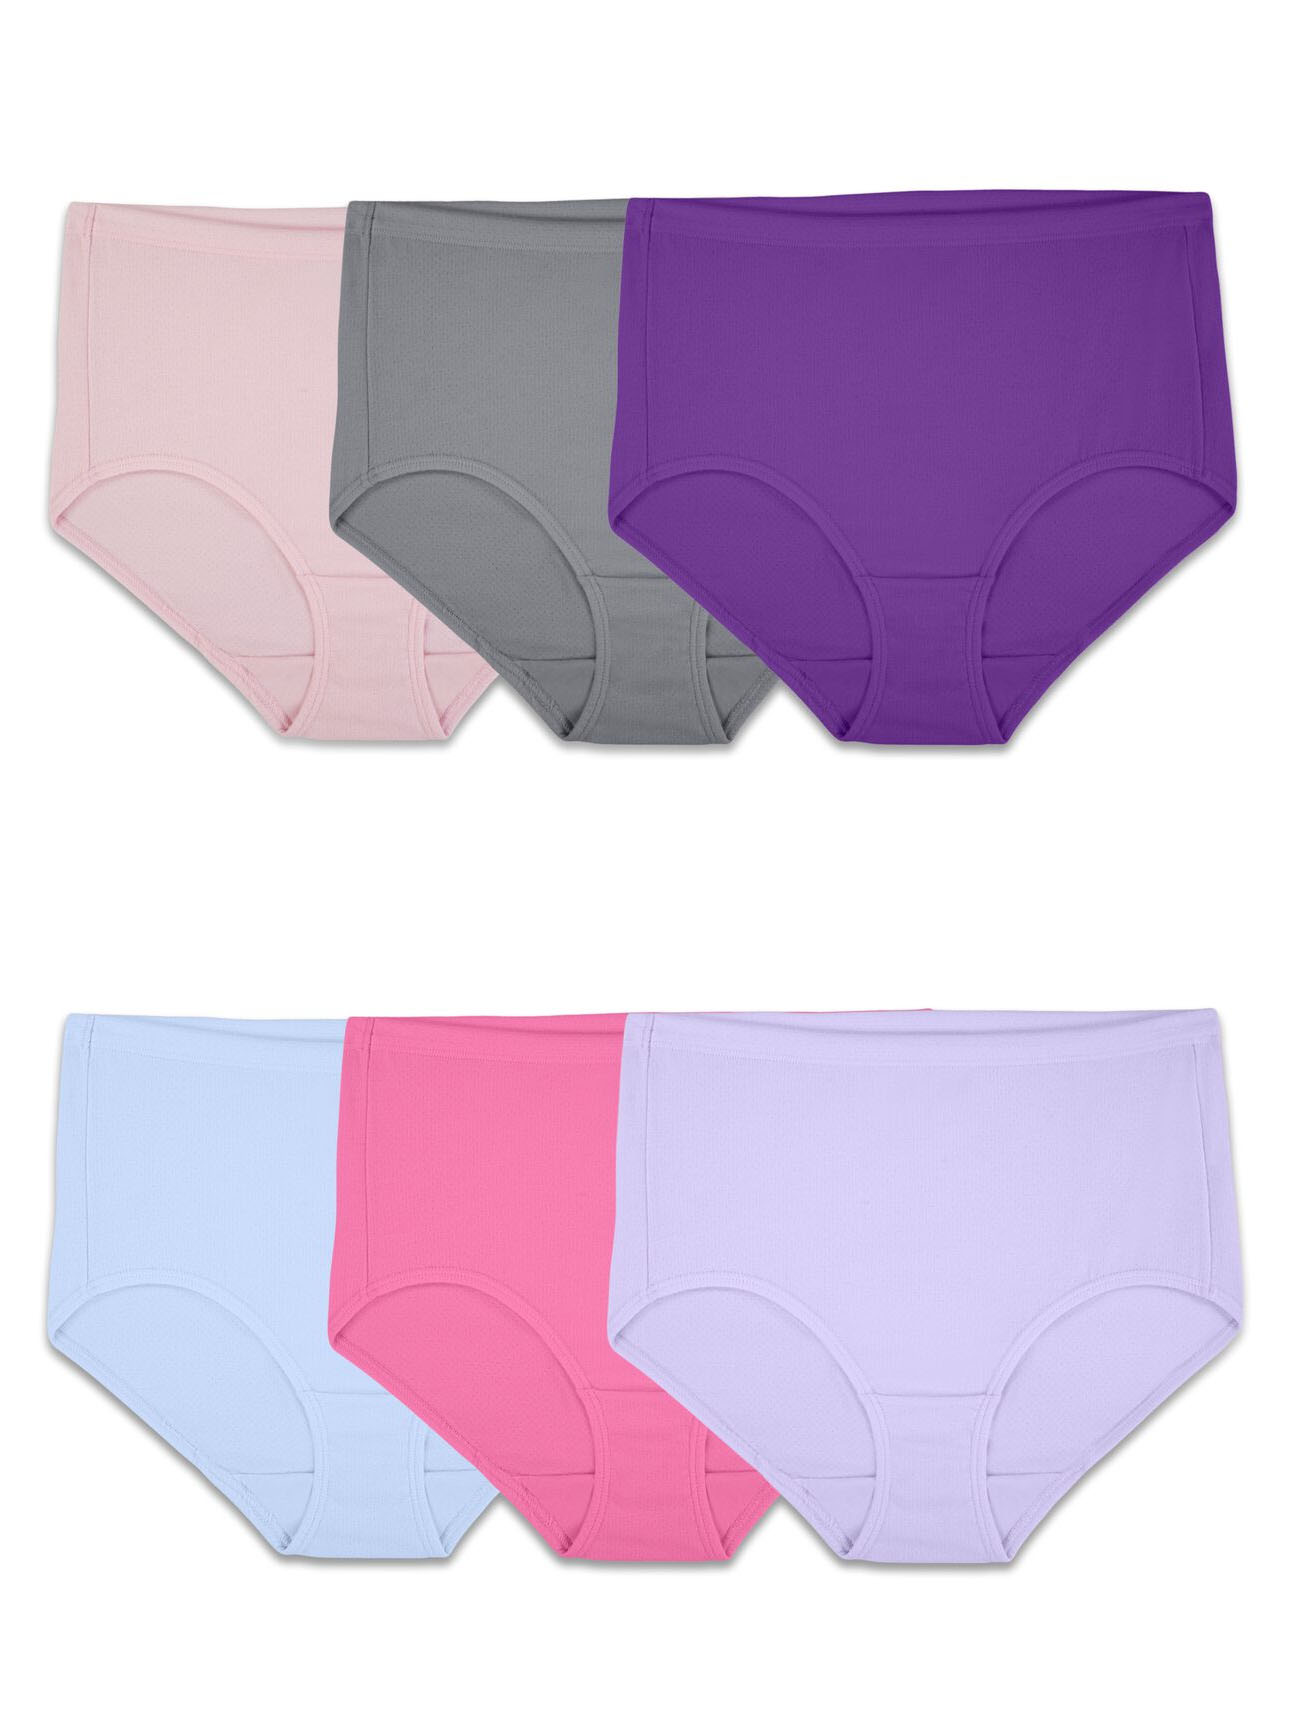 Fruit of The Loom Women's 6 PK Breathable Cotton Mesh Briefs